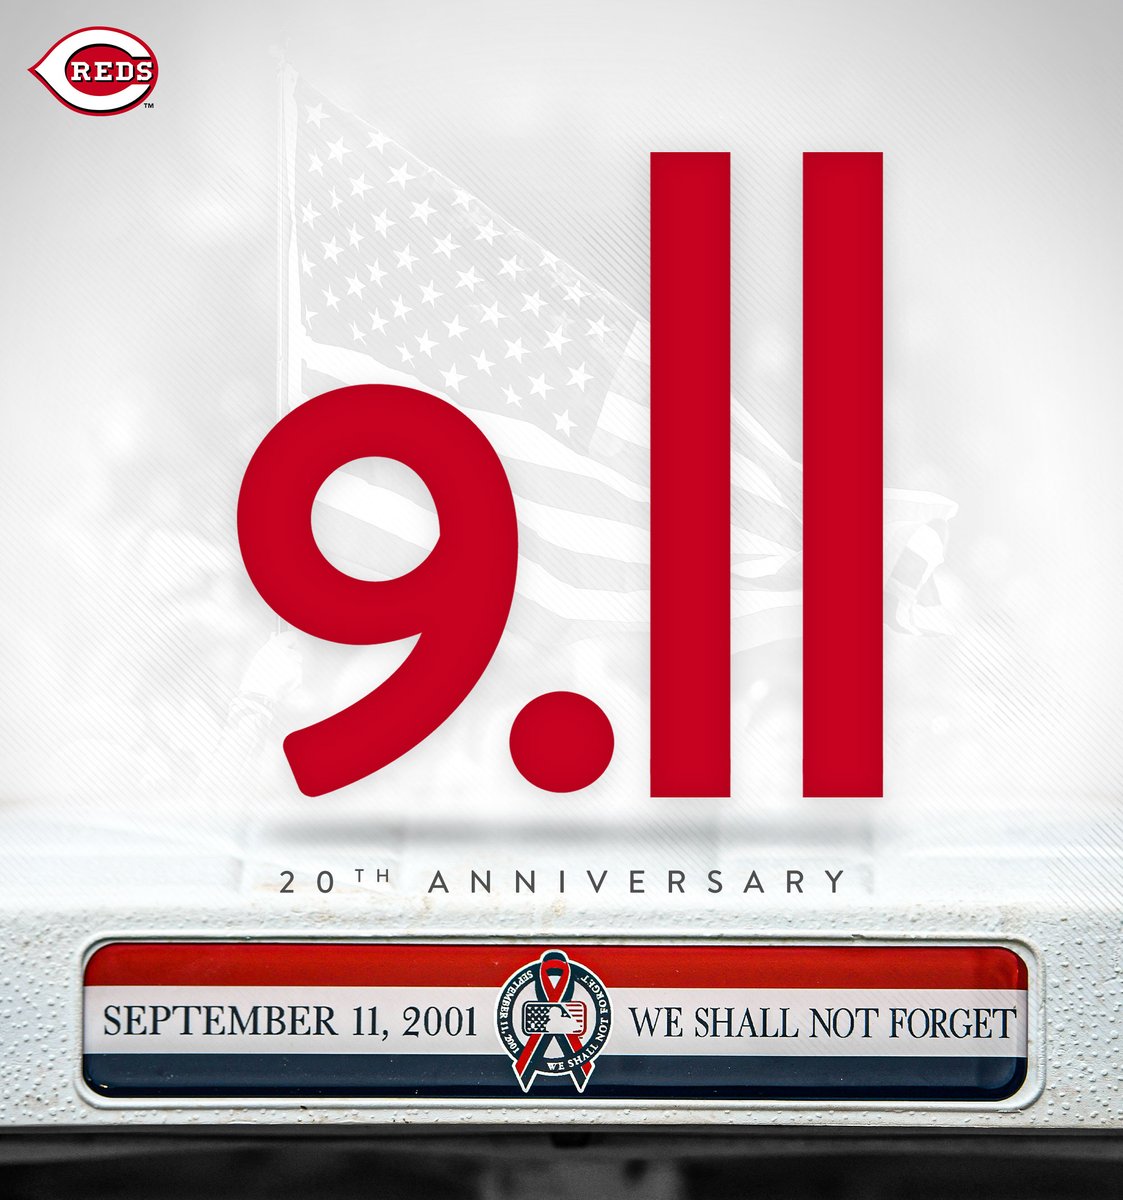 Cincinnati Reds Today We Honor The Lives Lost In The Tragic Events On This Date Years Ago As We Continue To Heal And Pay Tribute To The Men And